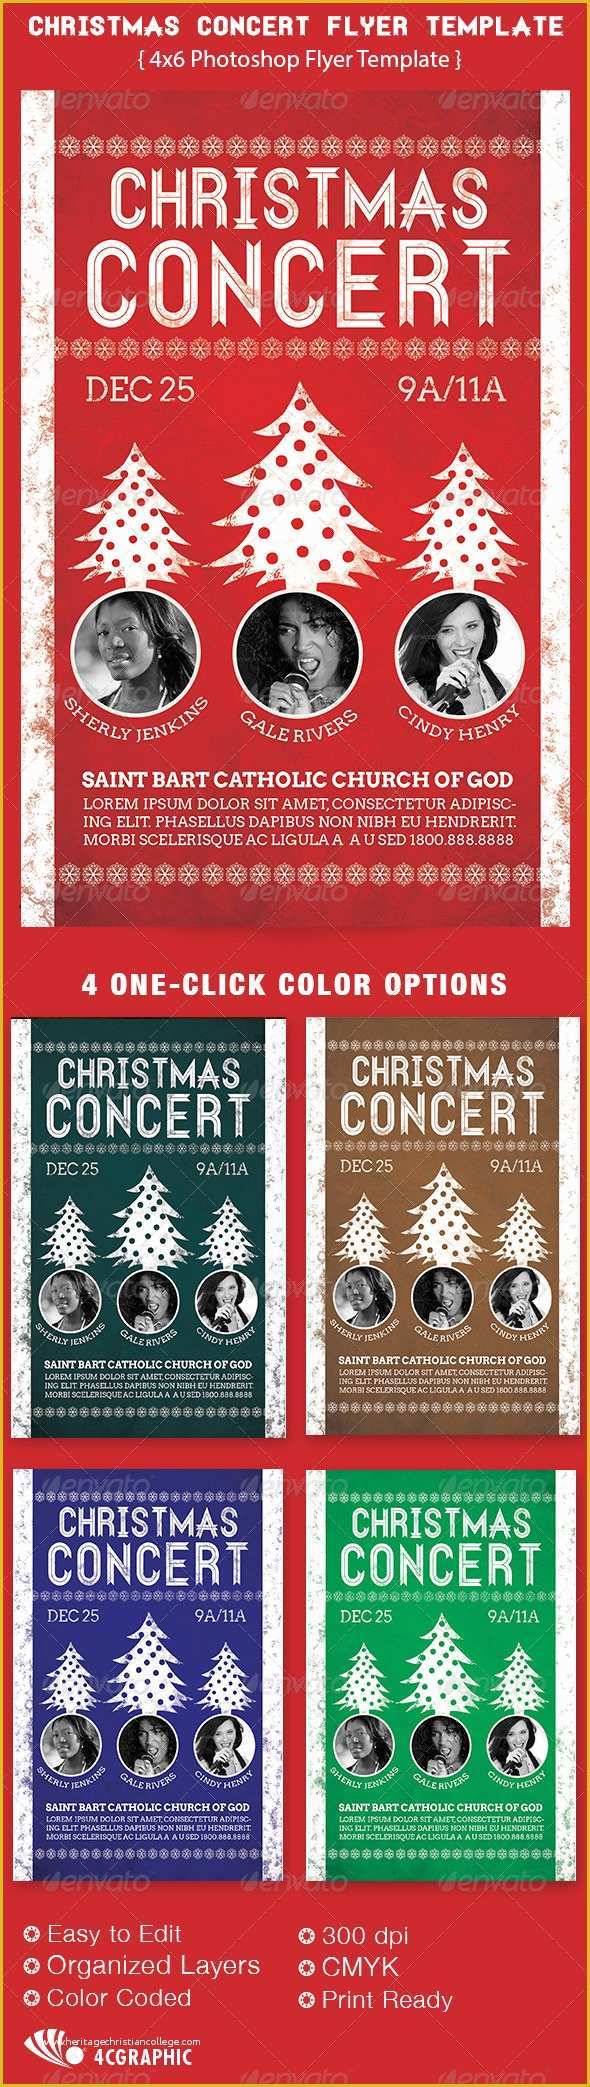 Christmas Concert Flyer Template Free Of Christmas Concert Flyer Template